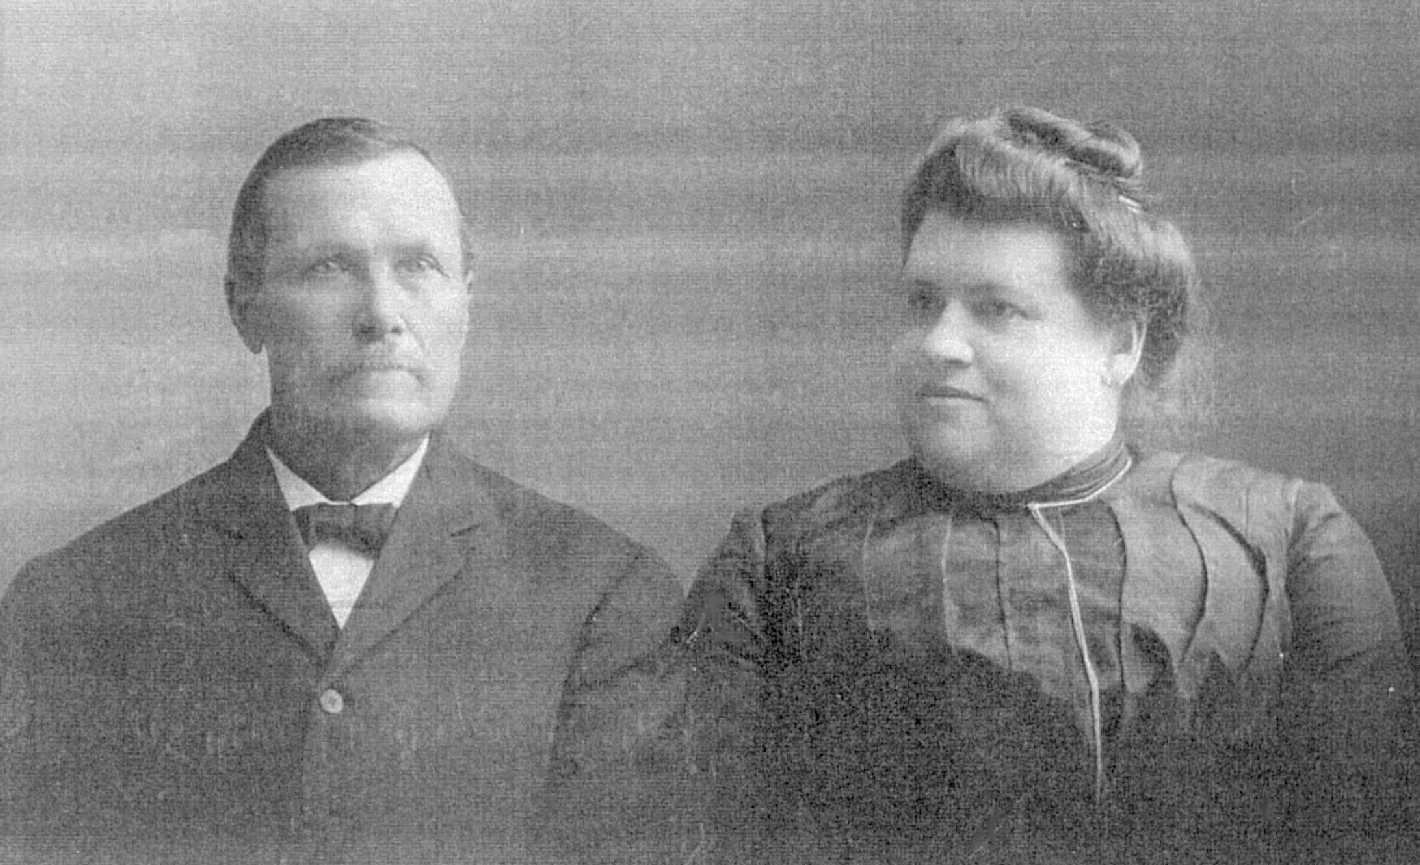 James Morehead Brown and second wife, Matilda Hornsby Brown, c. 1902